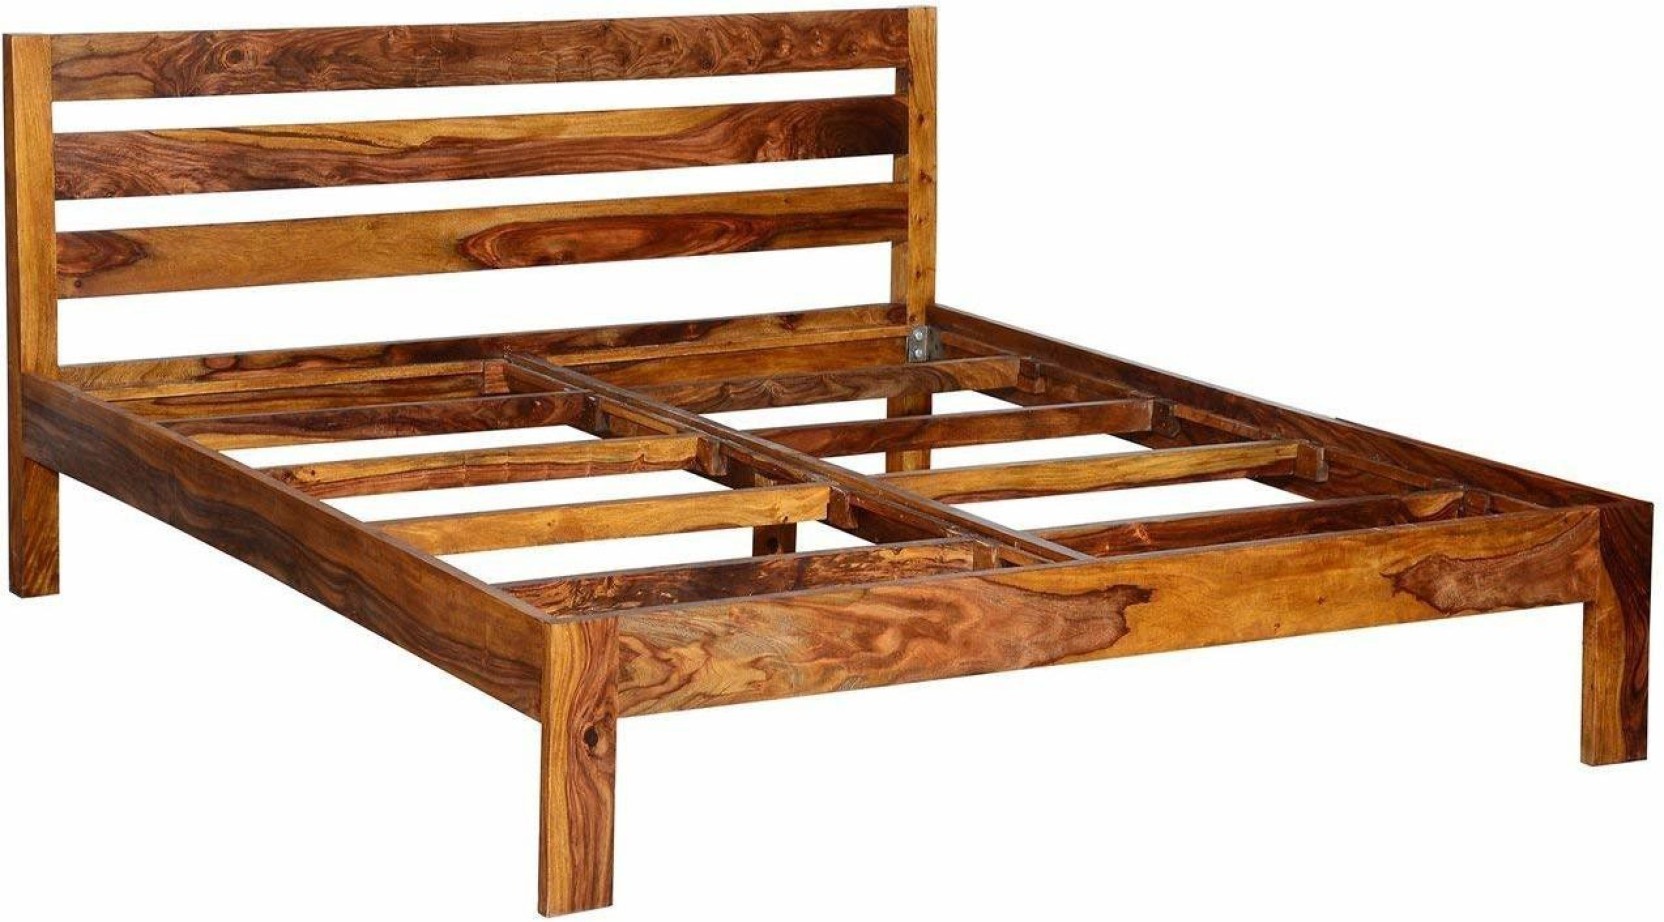 Aaram By Zebrs Solid Wood King Bed (Finish Color - Teak, Delivery Condition - DIY(Do-It-Yourself))